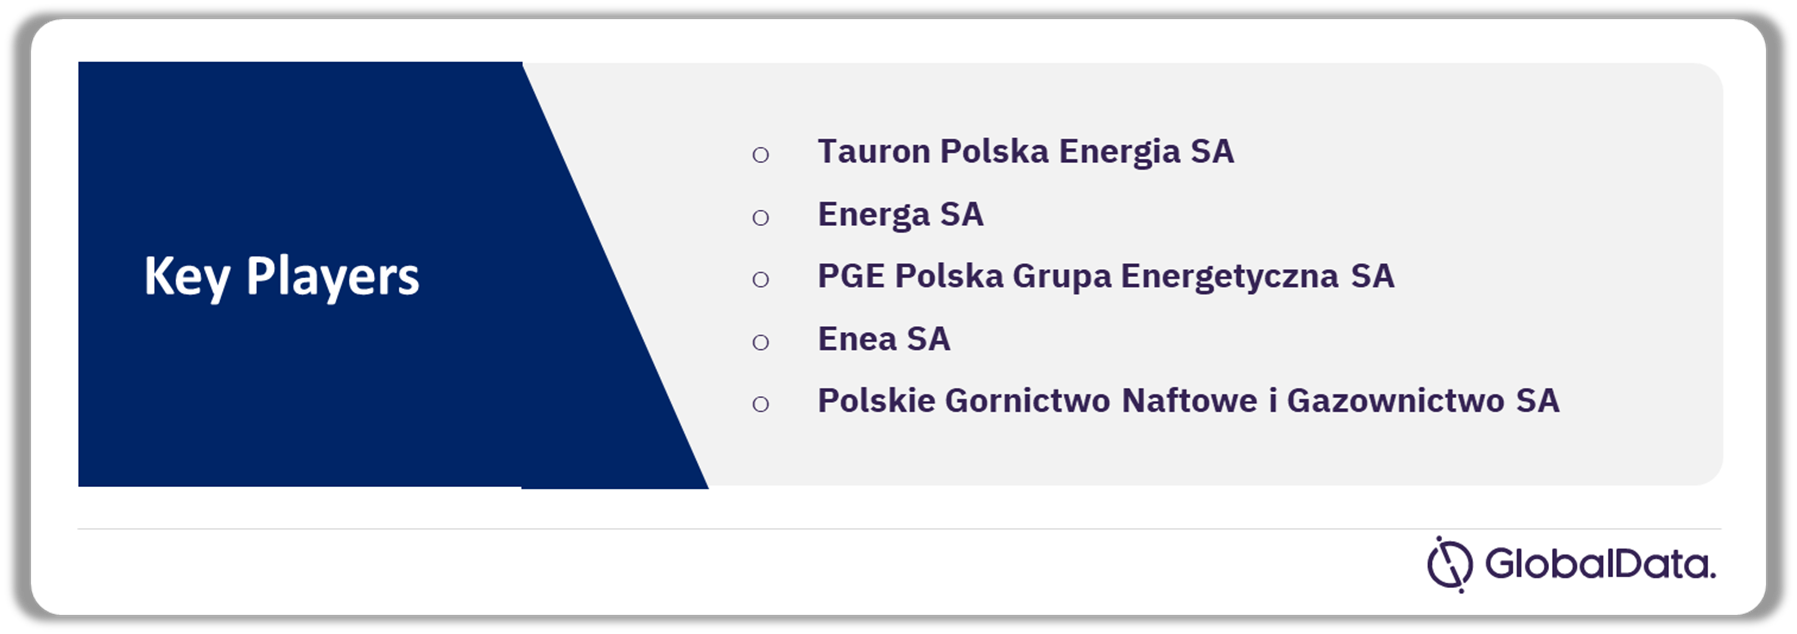 Poland Thermal Power Market Analysis by Companies